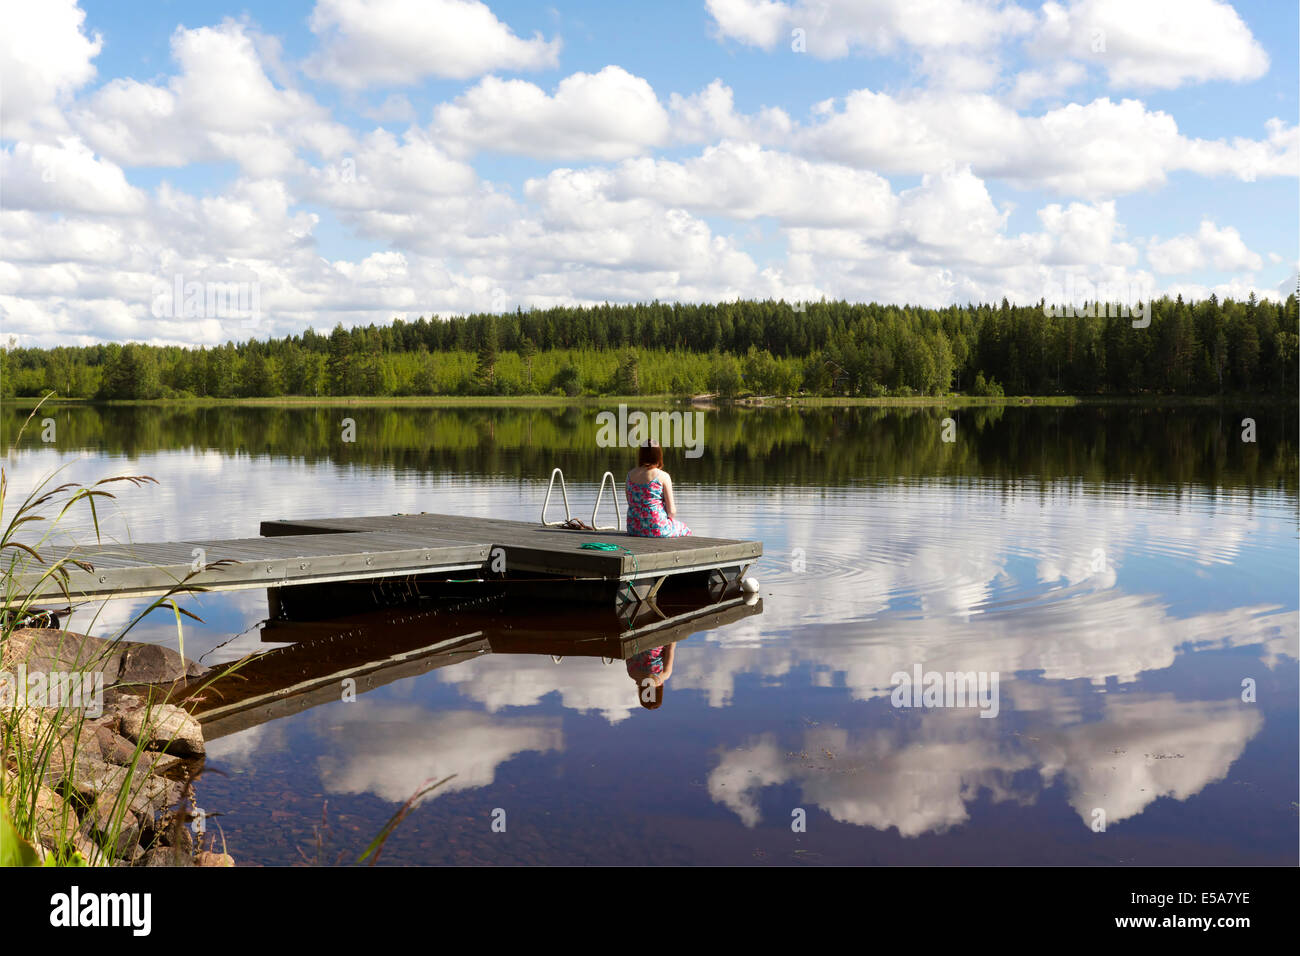 Lake scenery in summer in Finland with a woman sitting on pier Stock Photo